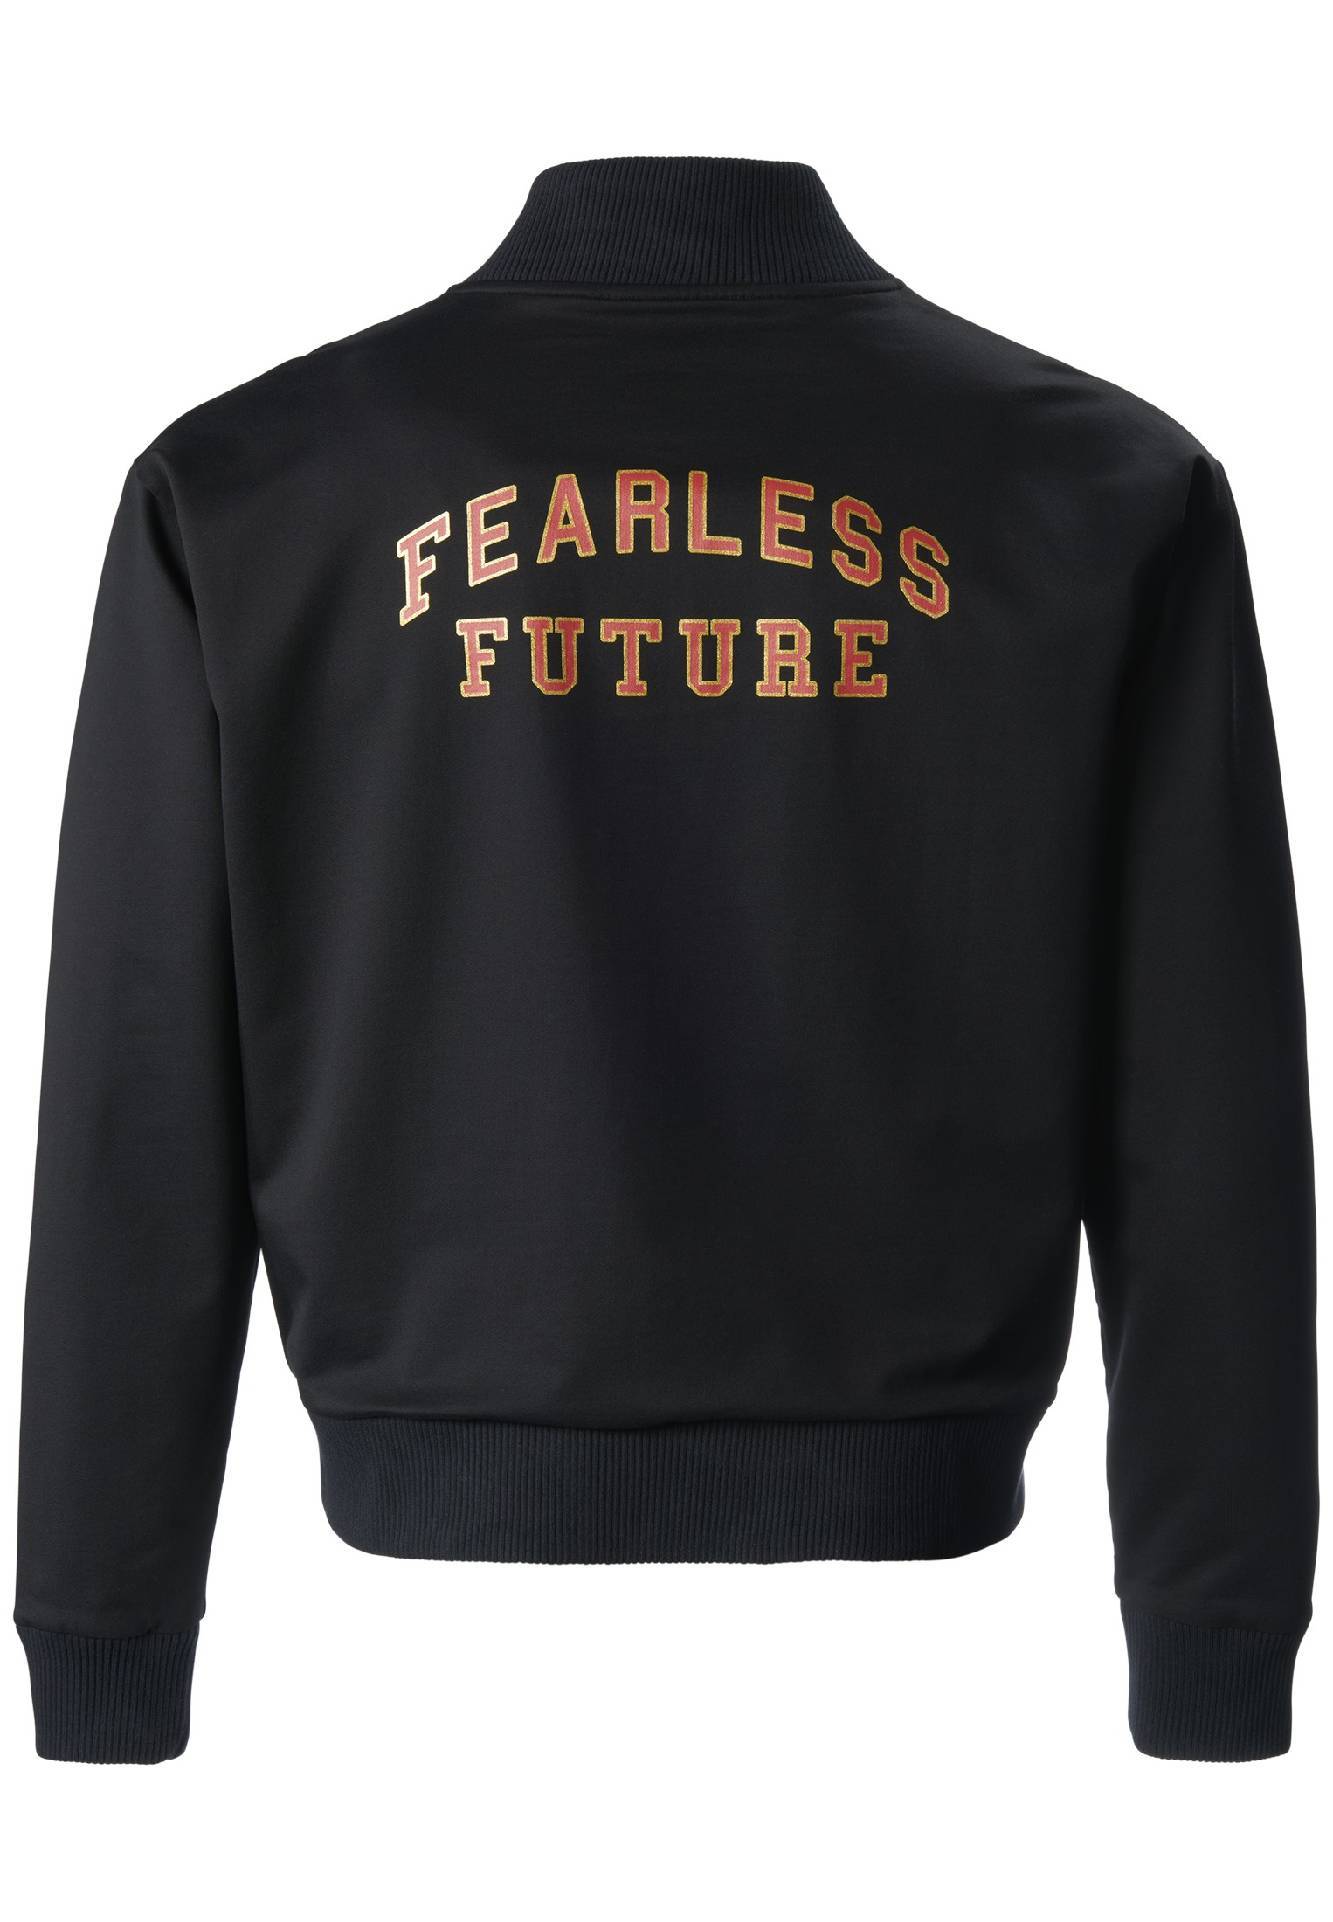 Fearless Future Bomber